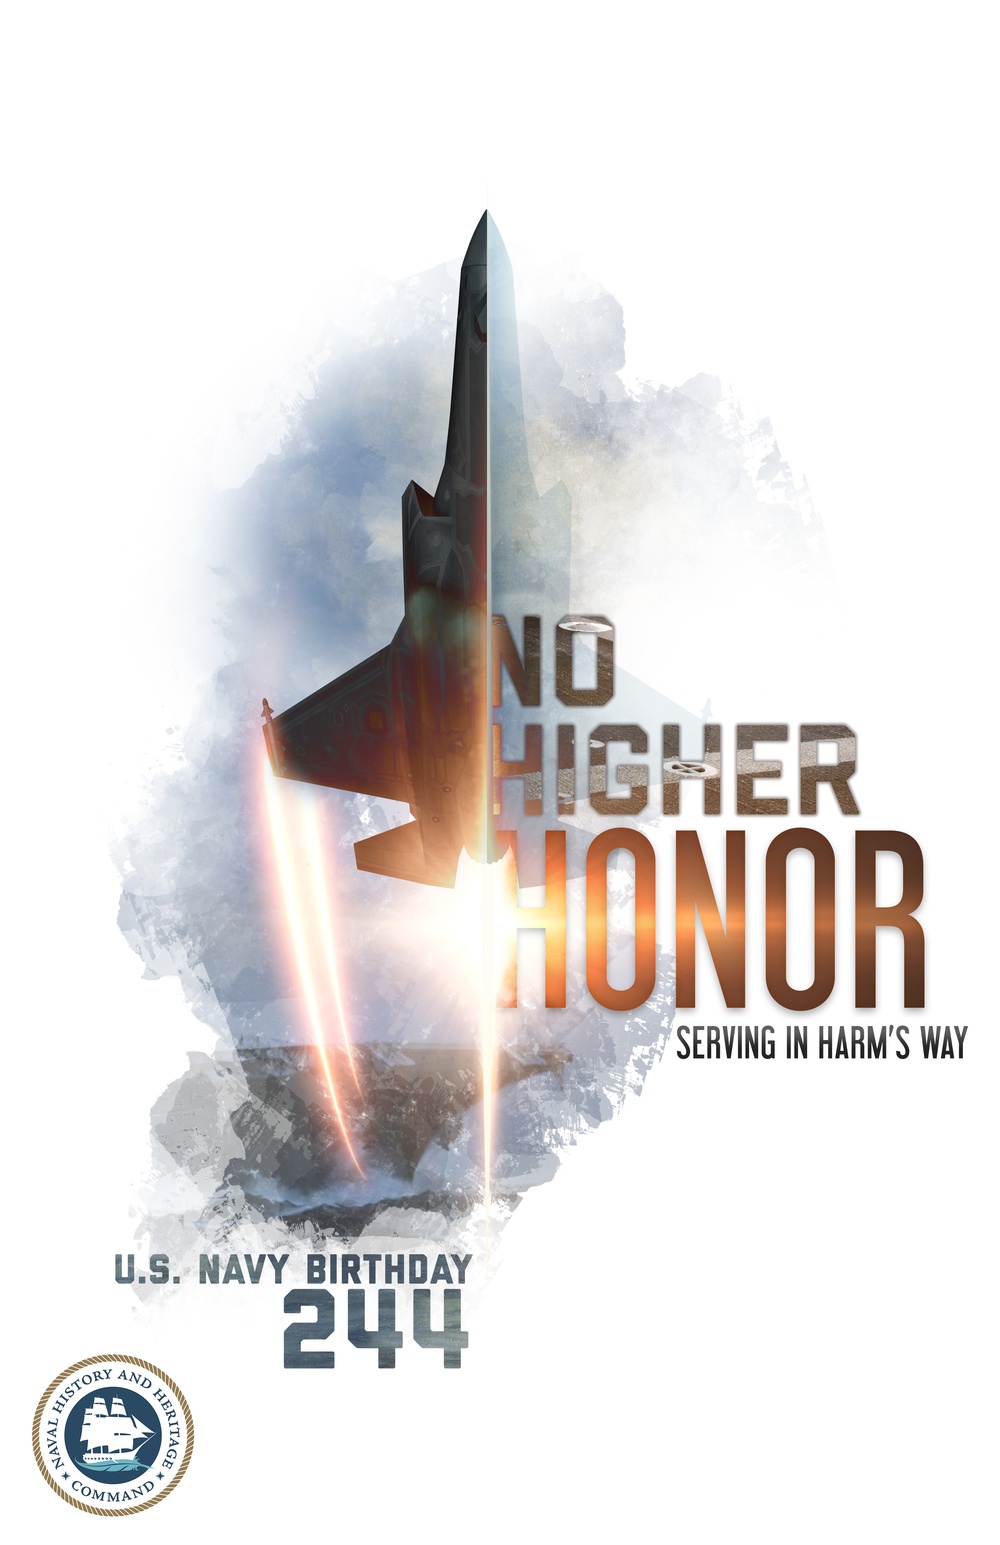 Navy Birthday 244 No Higher Honor - Air - Poster